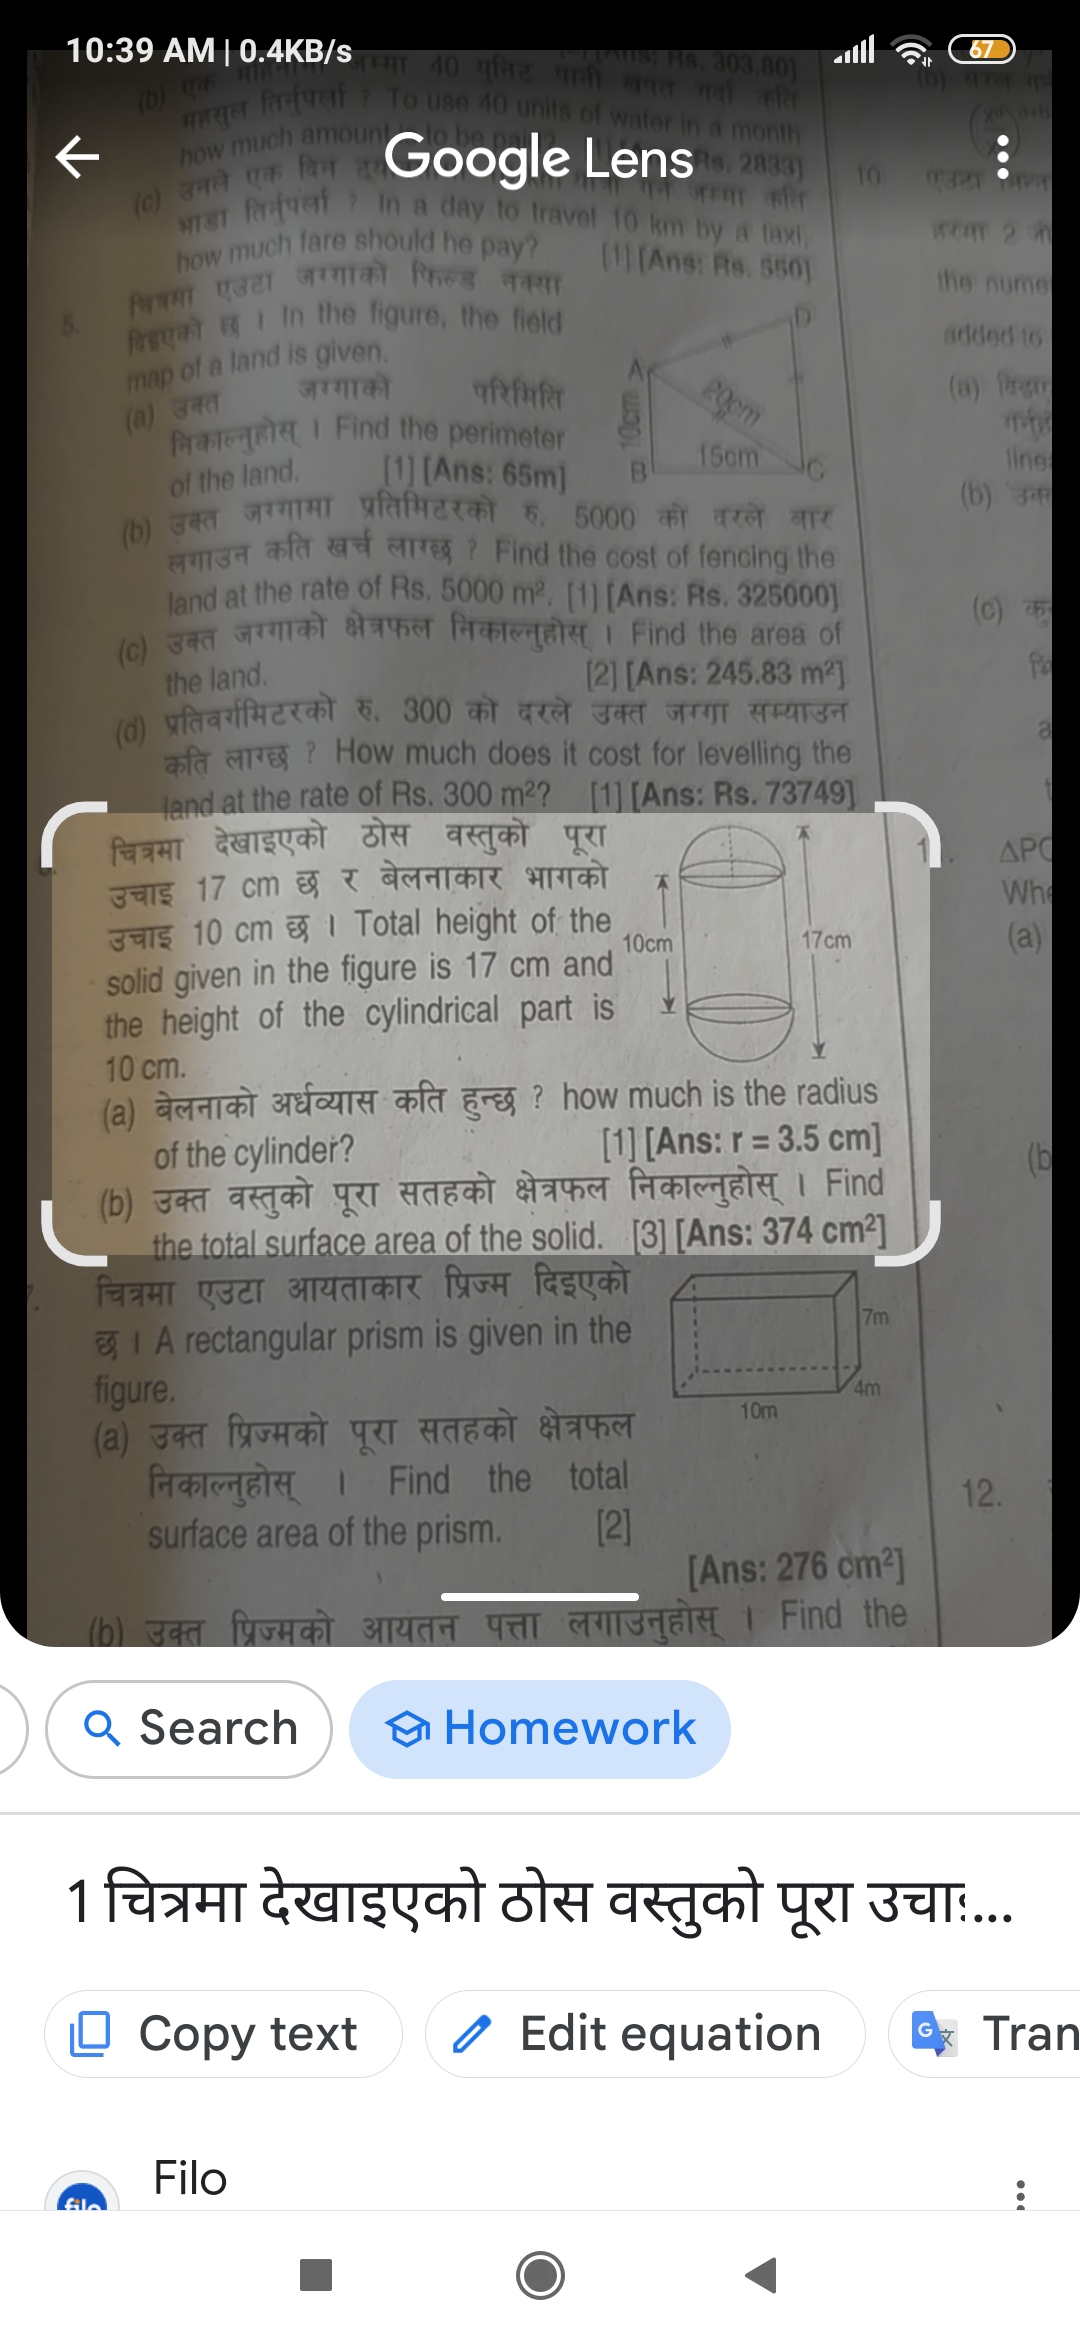 Google Lens
세 6
निकाल्नुहोस् । Find the total
surface area of the pris